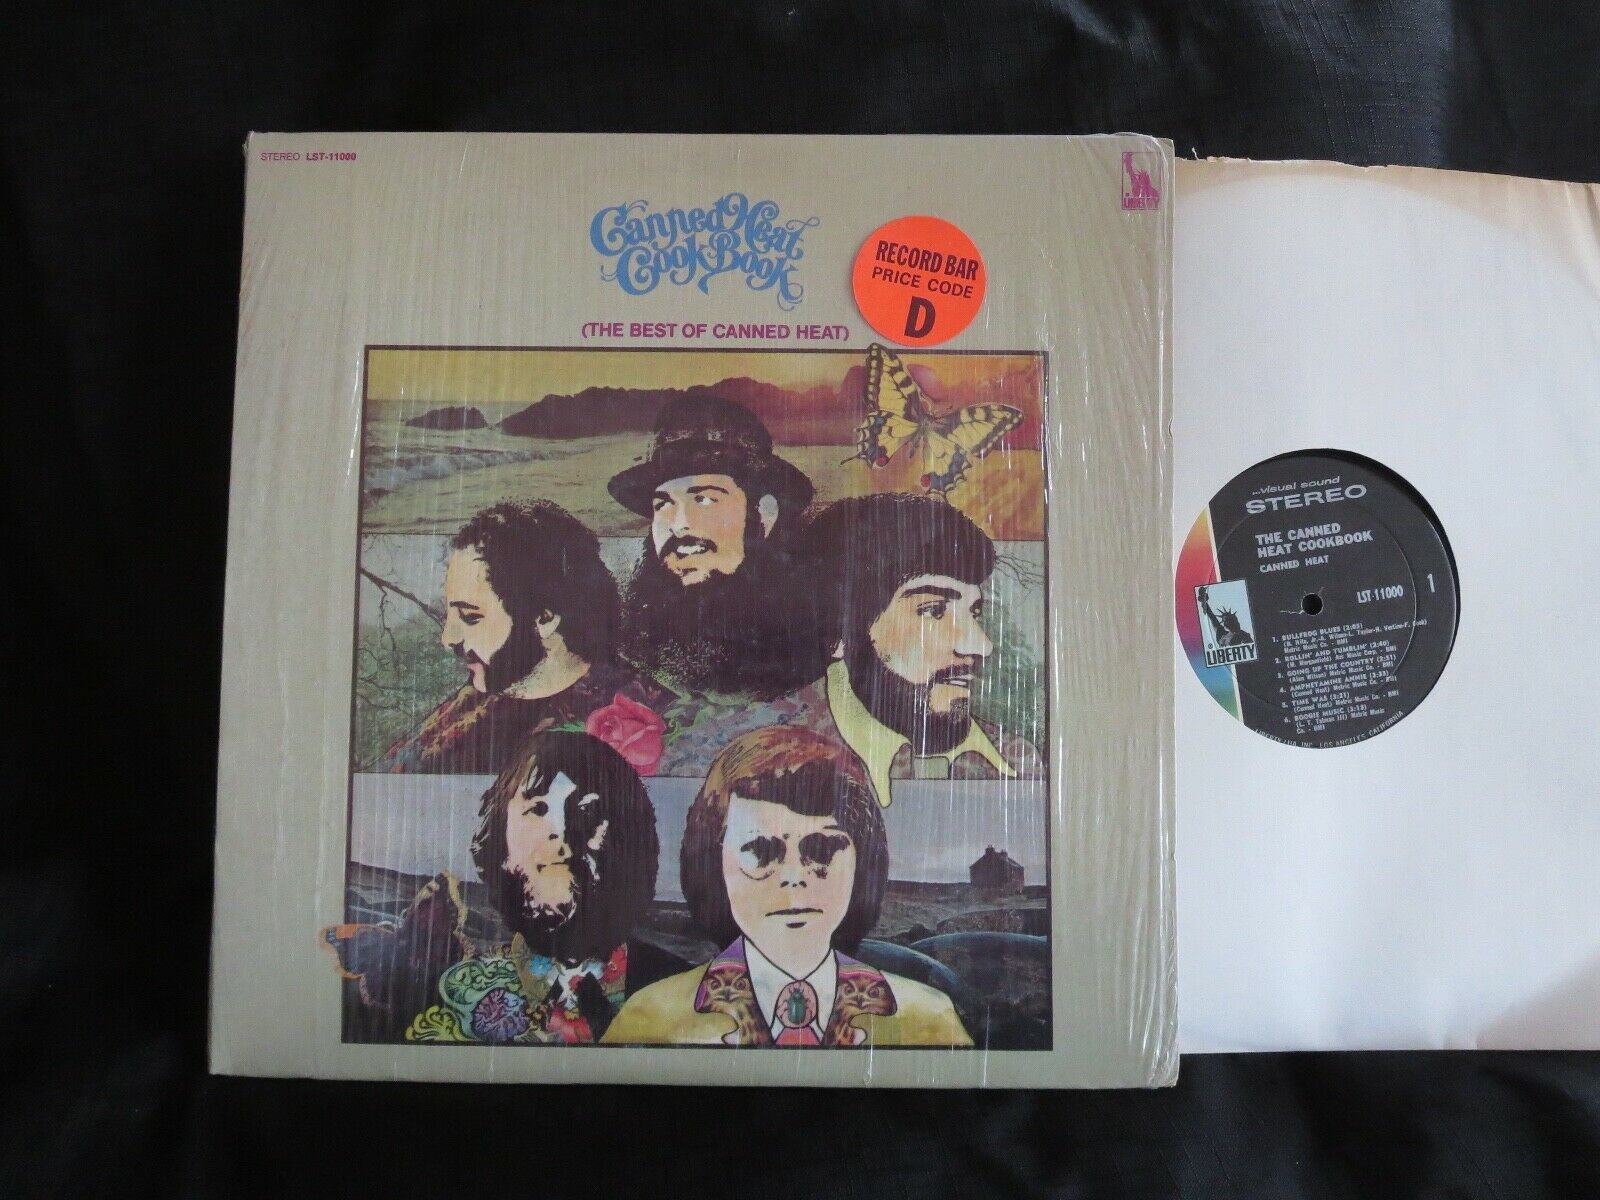 CANNED HEAT, The Canned Heat Cook Book (The Best Of) USA 1st pressing EXC- LP